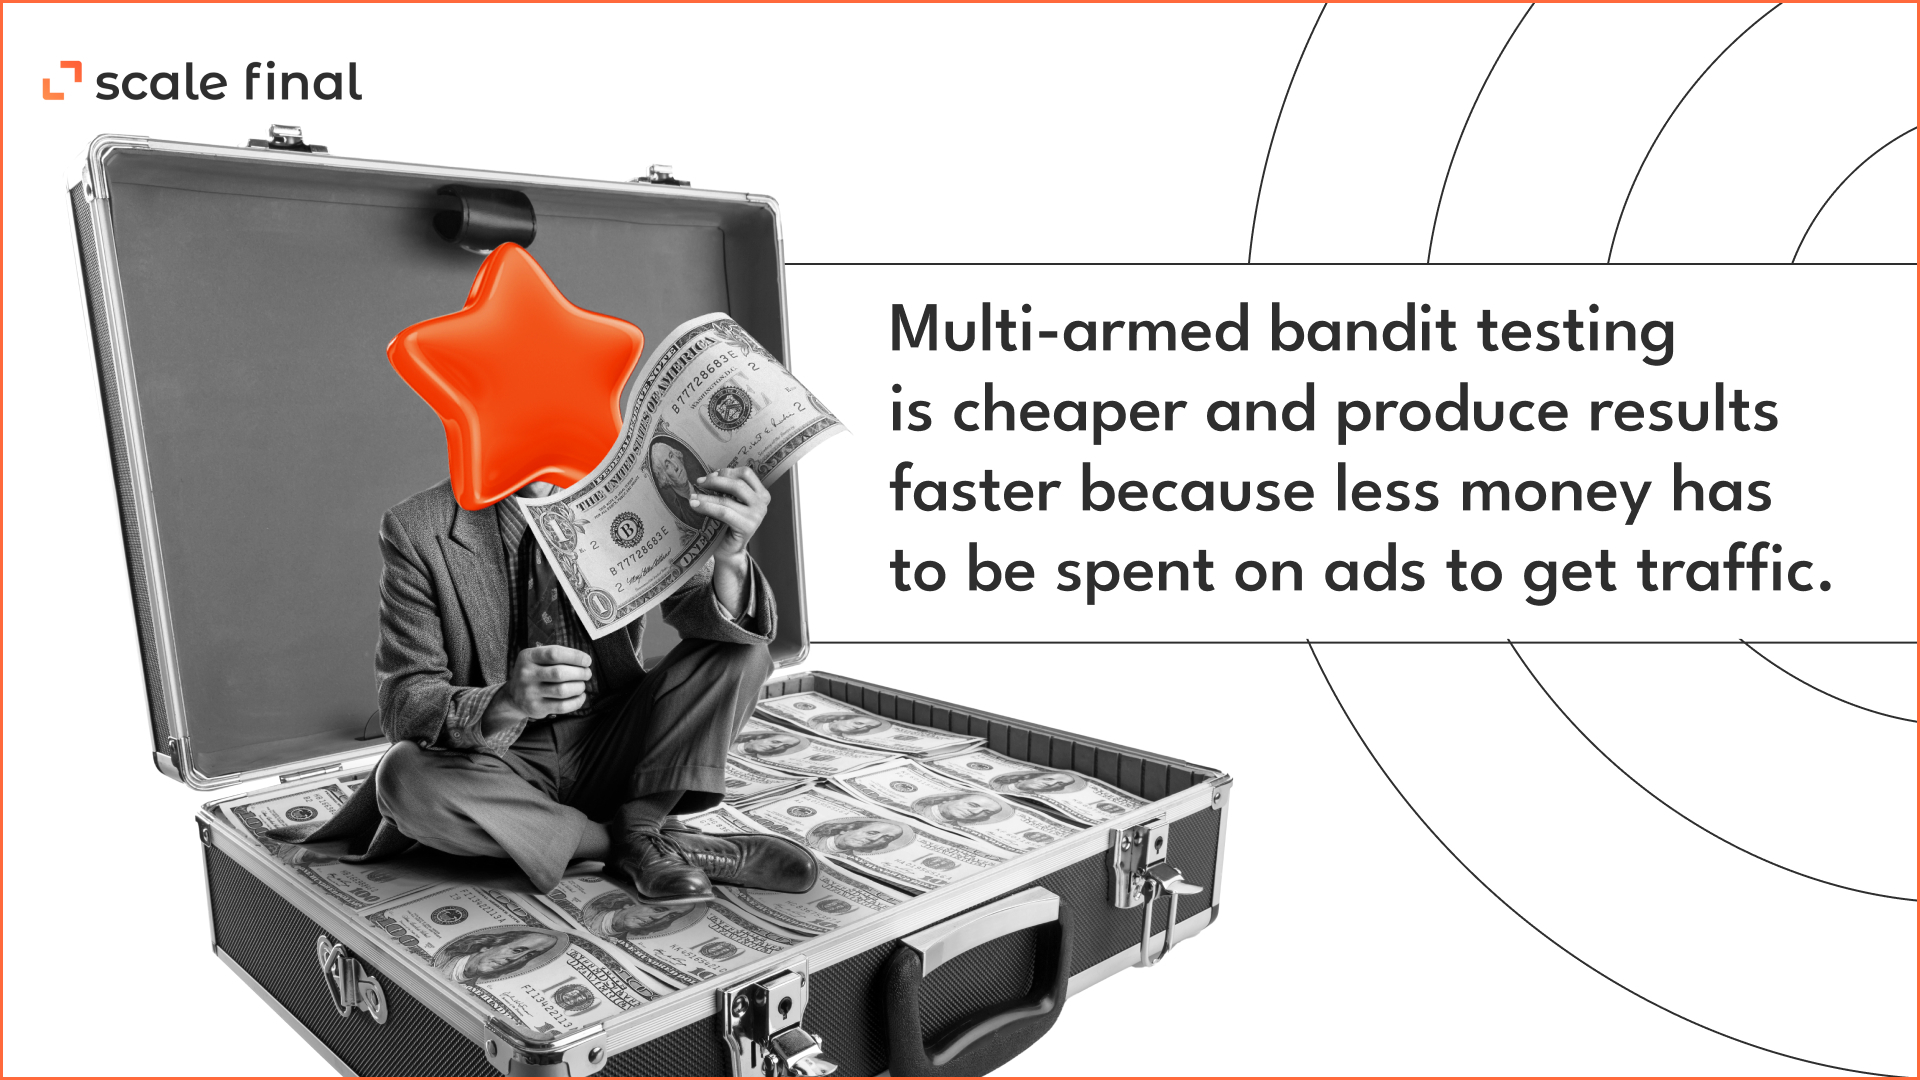 Multi-armed bandit testing is cheaper and produce results faster because less money has to be spent on ads to get traffic. 